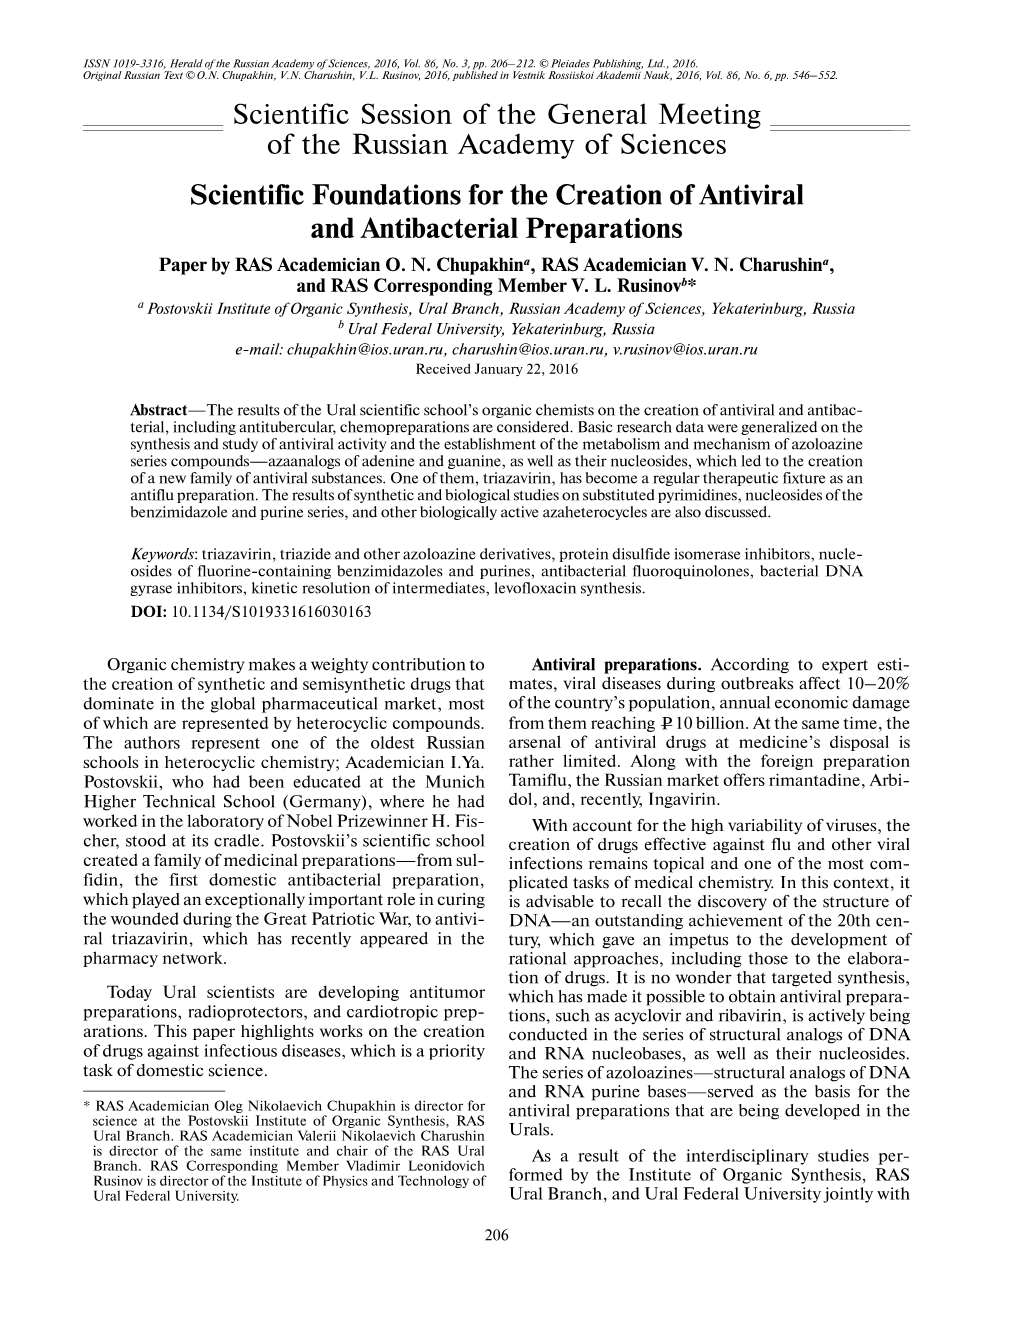 Scientific Foundations for the Creation of Antiviral and Antibacterial Preparations Paper by RAS Academician O